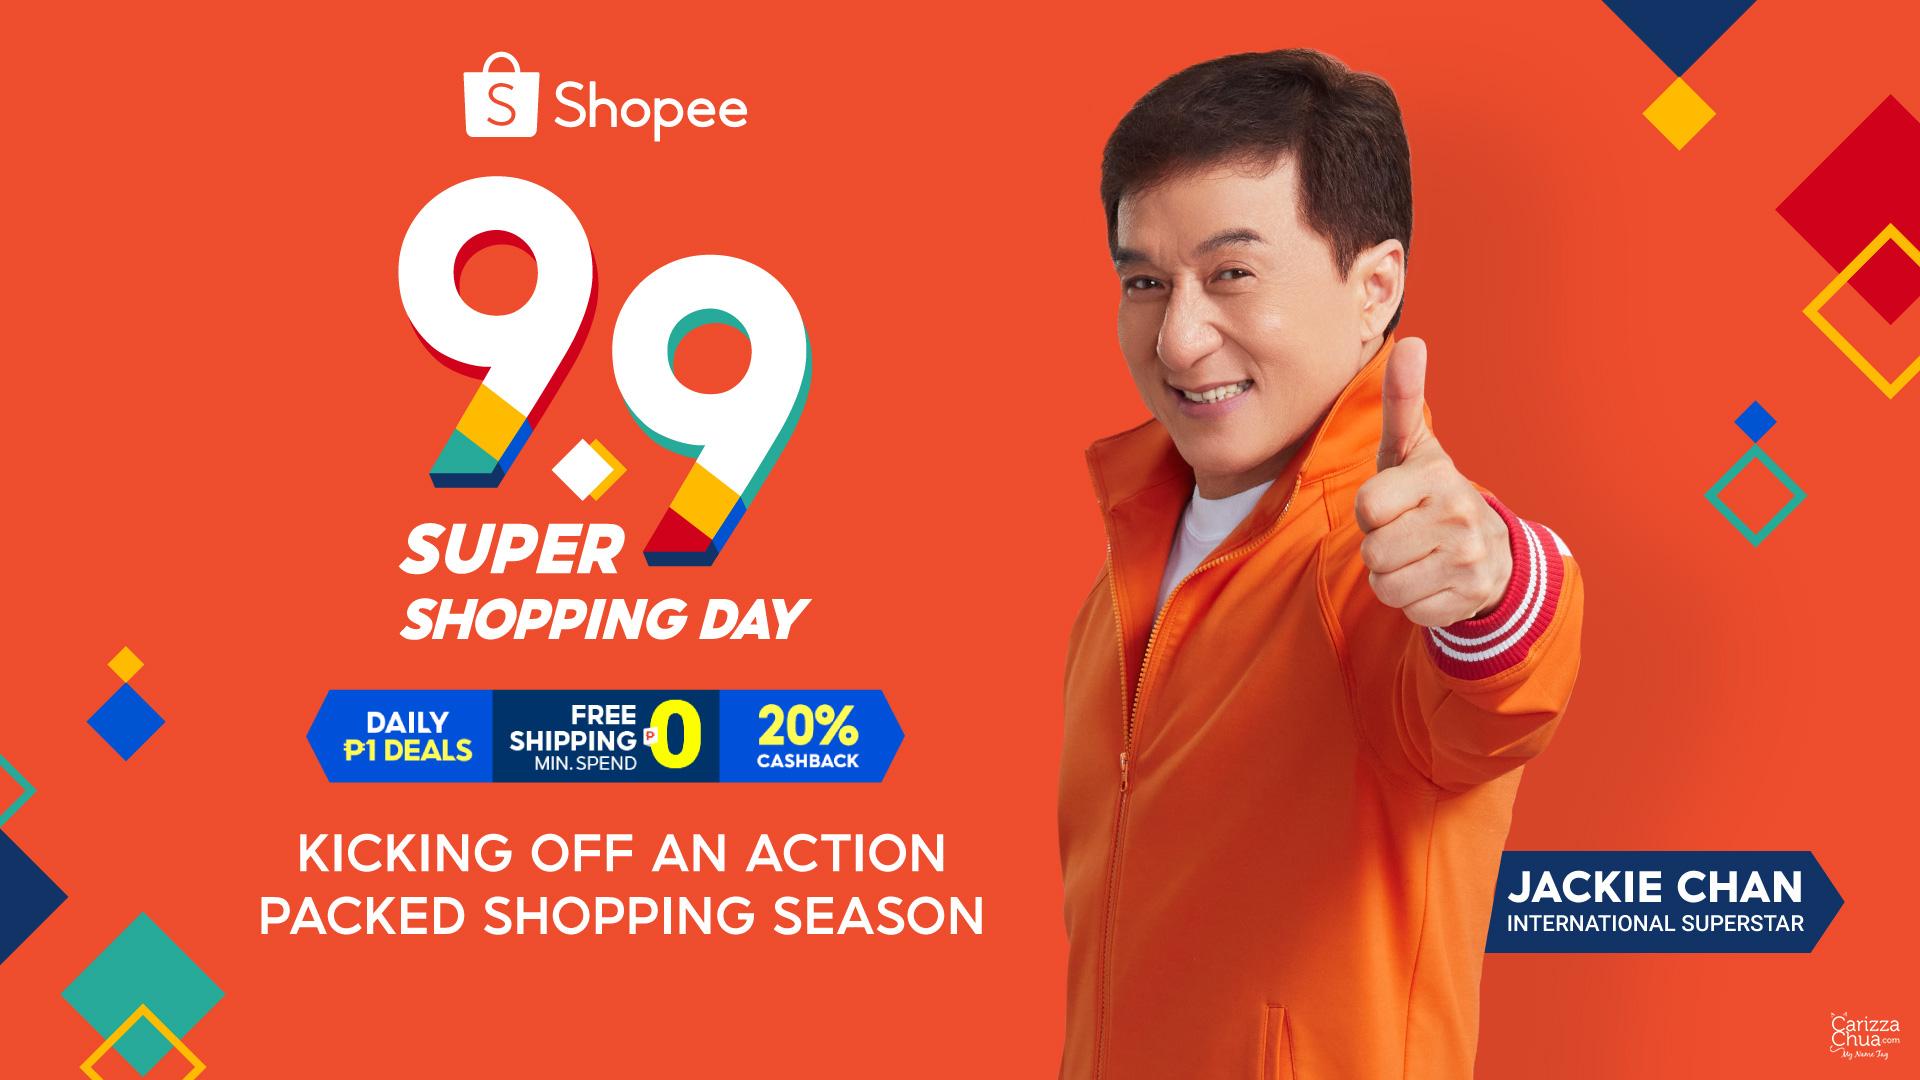 Shopee 9.9 Super Shopping Day is the Most Action-Packed Year-End Shopping Season with International Superstar, Jackie Chan